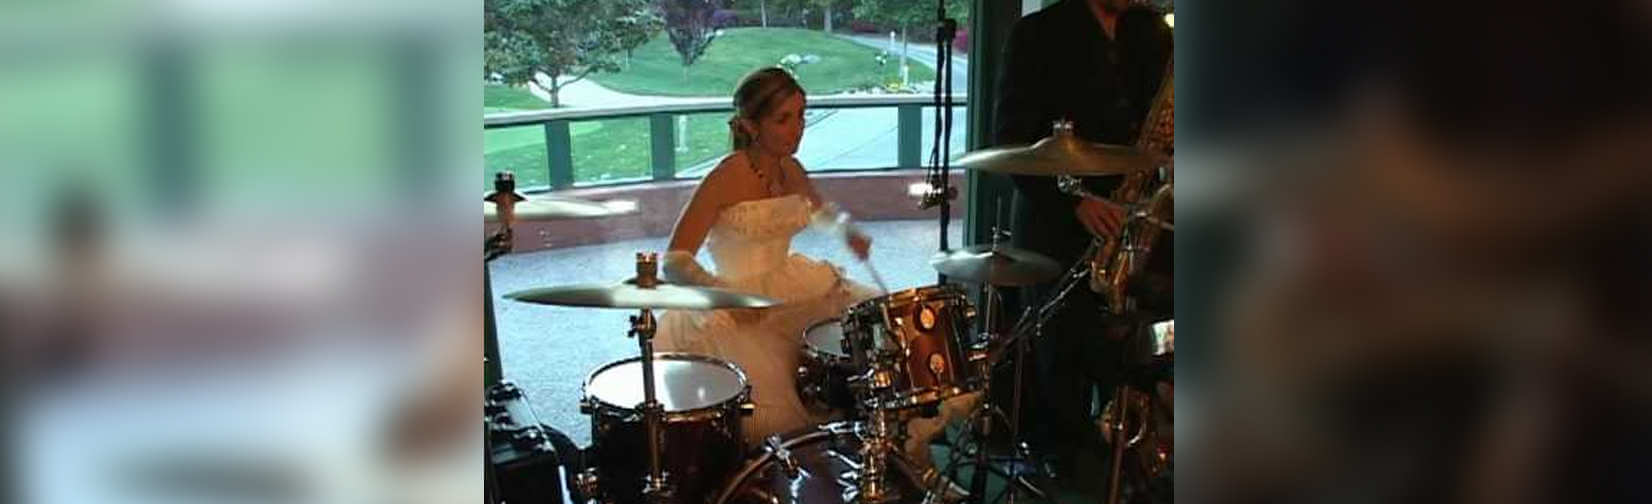 Watch This Bride Rip on a Drum Solo in Her Wedding Gown